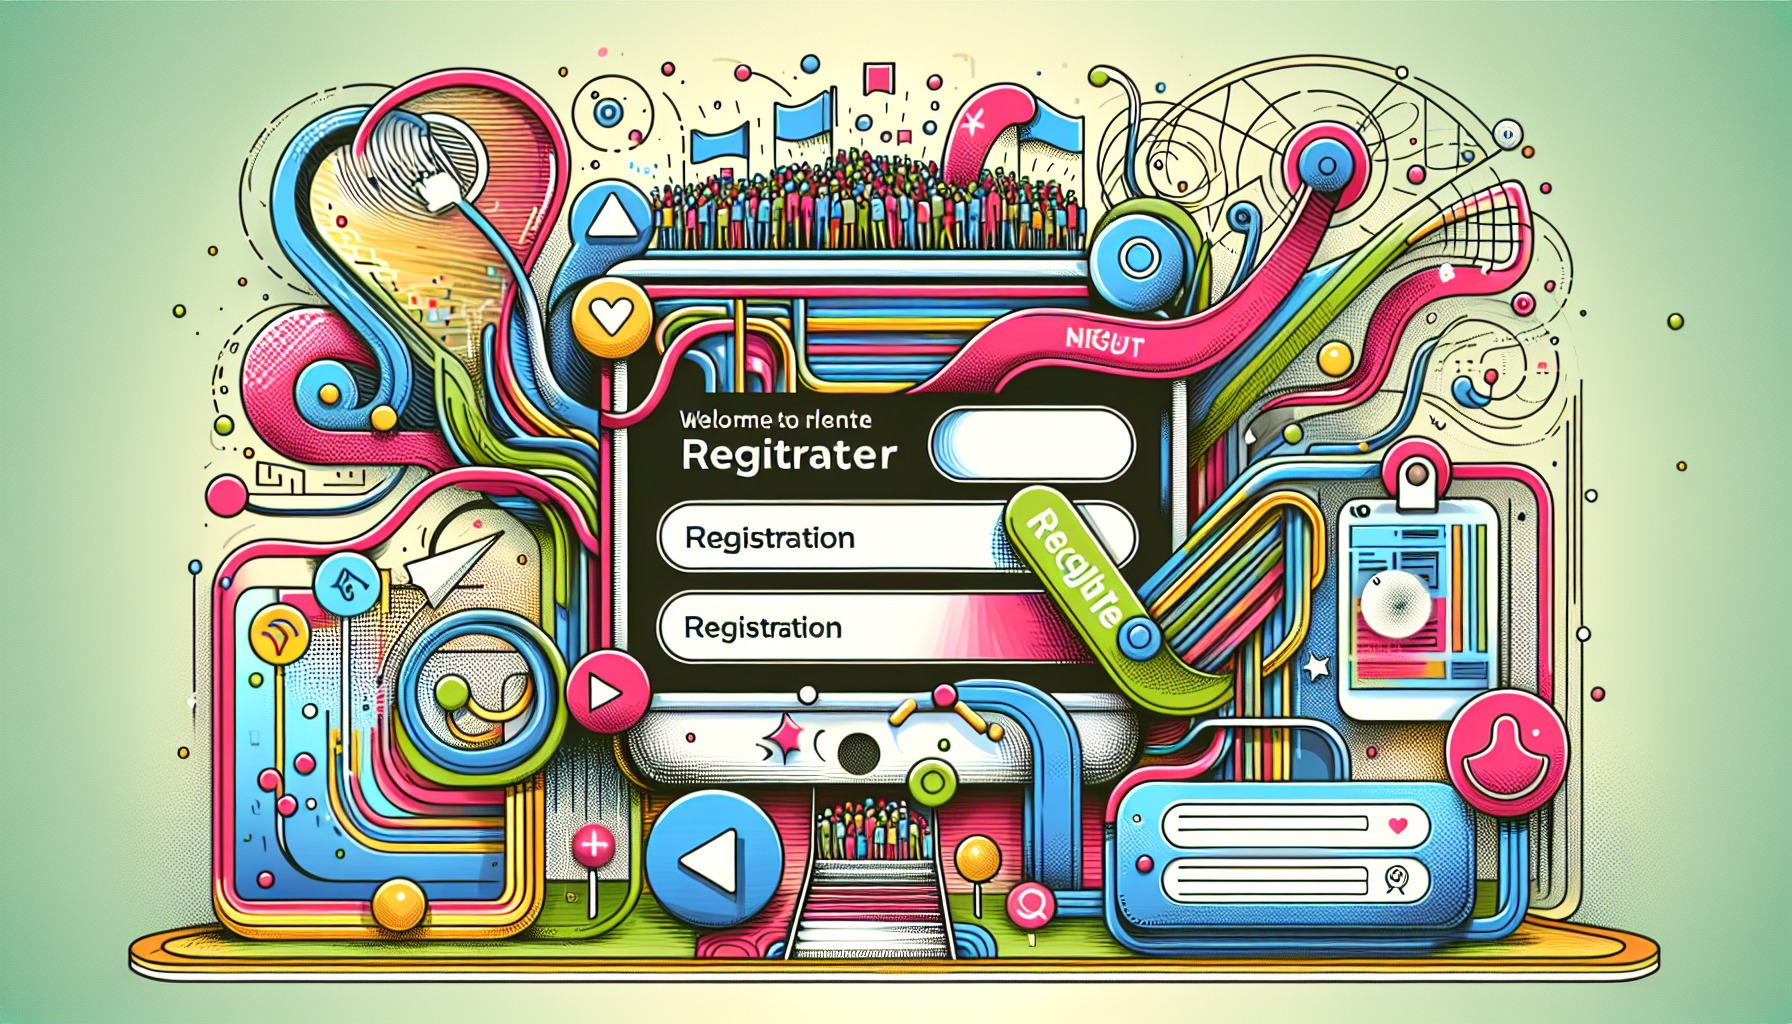 Illustration of a landing page for event registration with engaging visuals